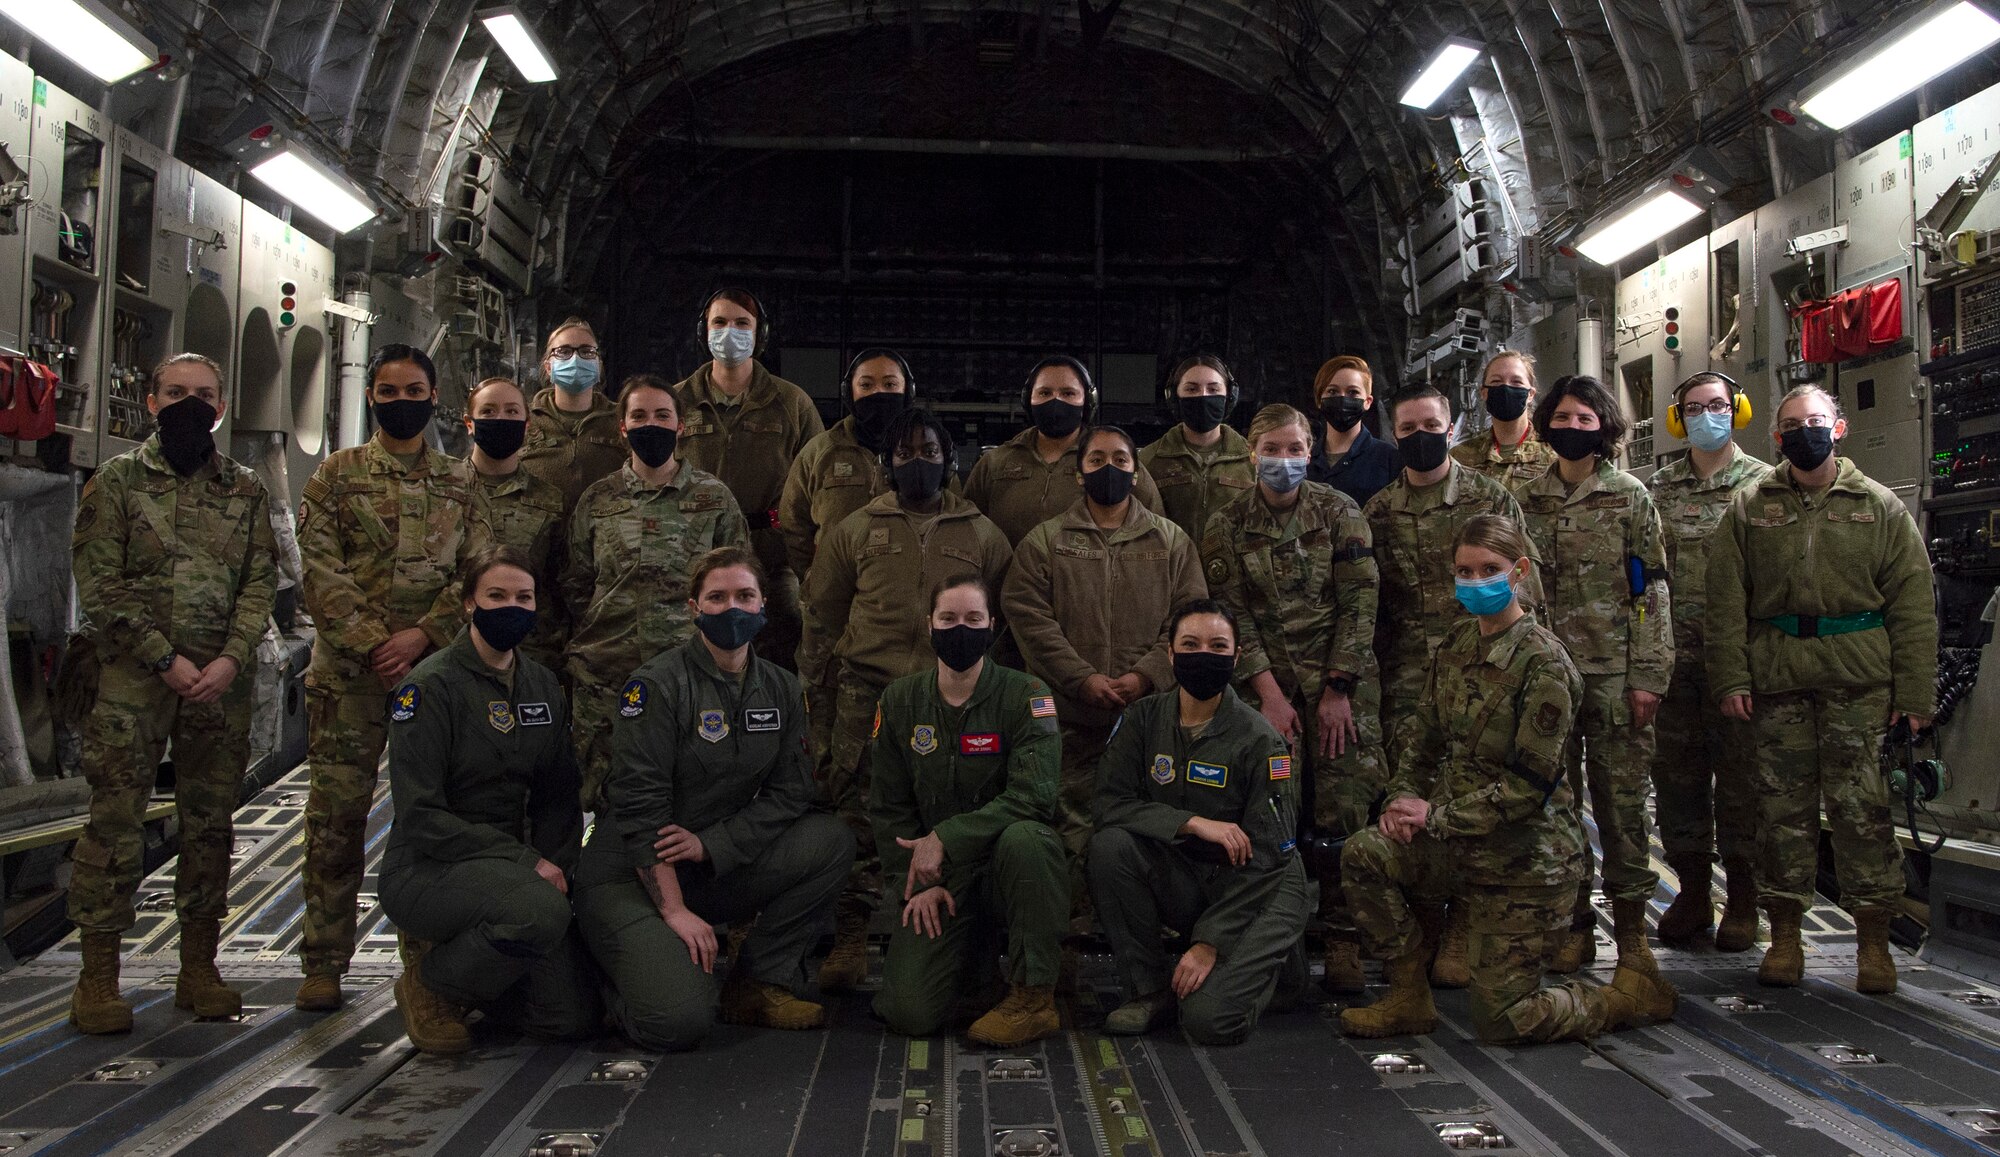 Team McChord Airmen pose for a group photo inside a C-17 Globemaster III at Joint Base Lewis-McChord, Washington, Dec. 14, 2020. The all-female crew prepared, launched and executed a flight-training mission in honor of women in the military. (U.S. Air Force photo by Senior Airman Tryphena Mayhugh)